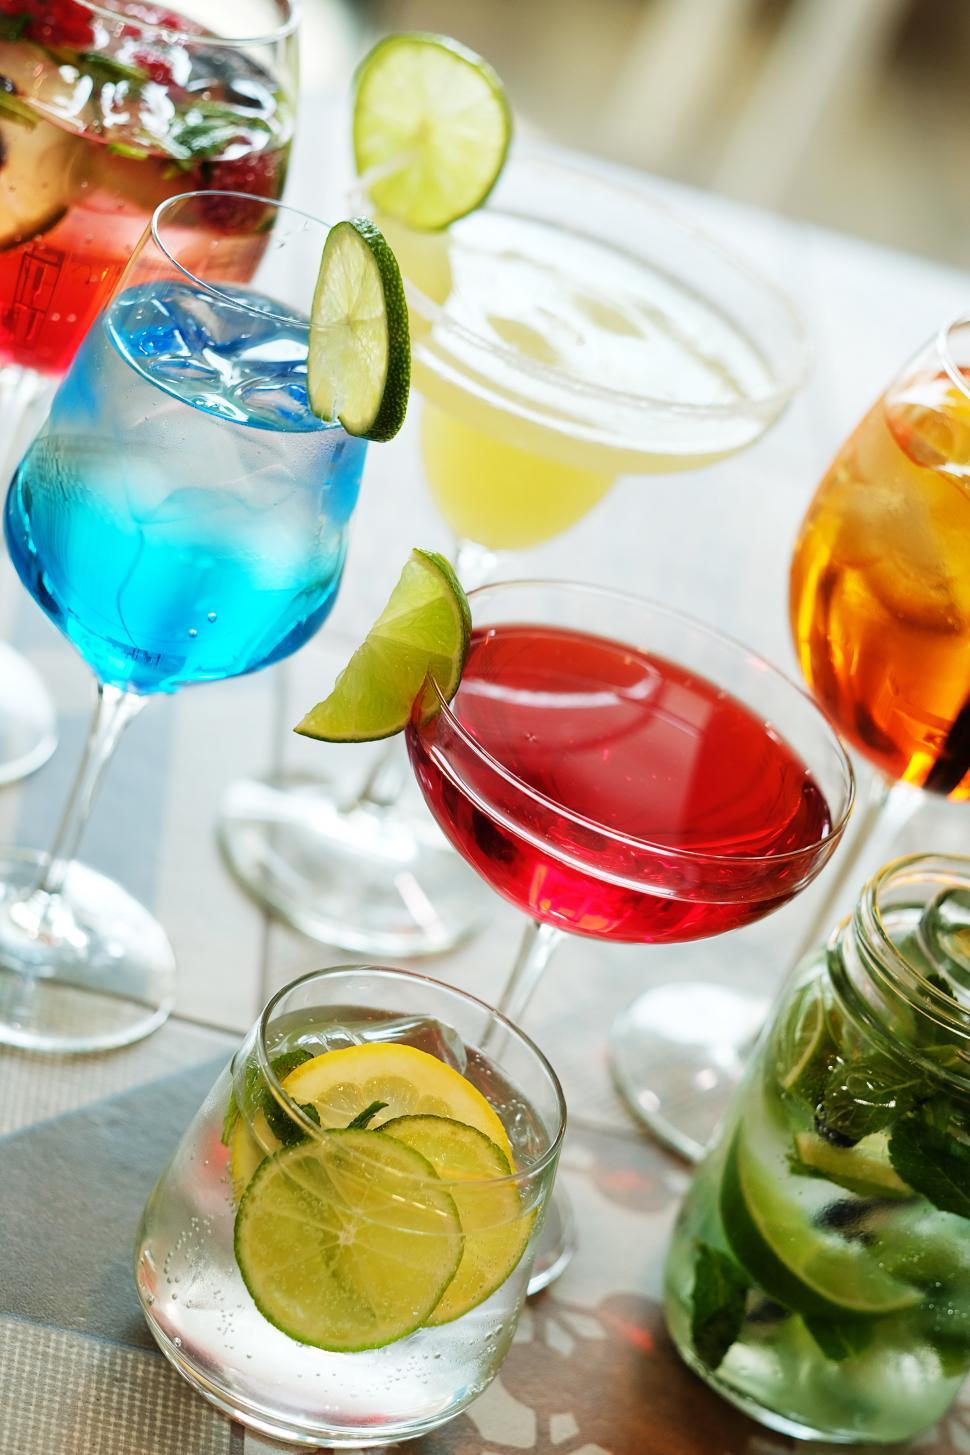 Free Image of Assorted Cocktails 